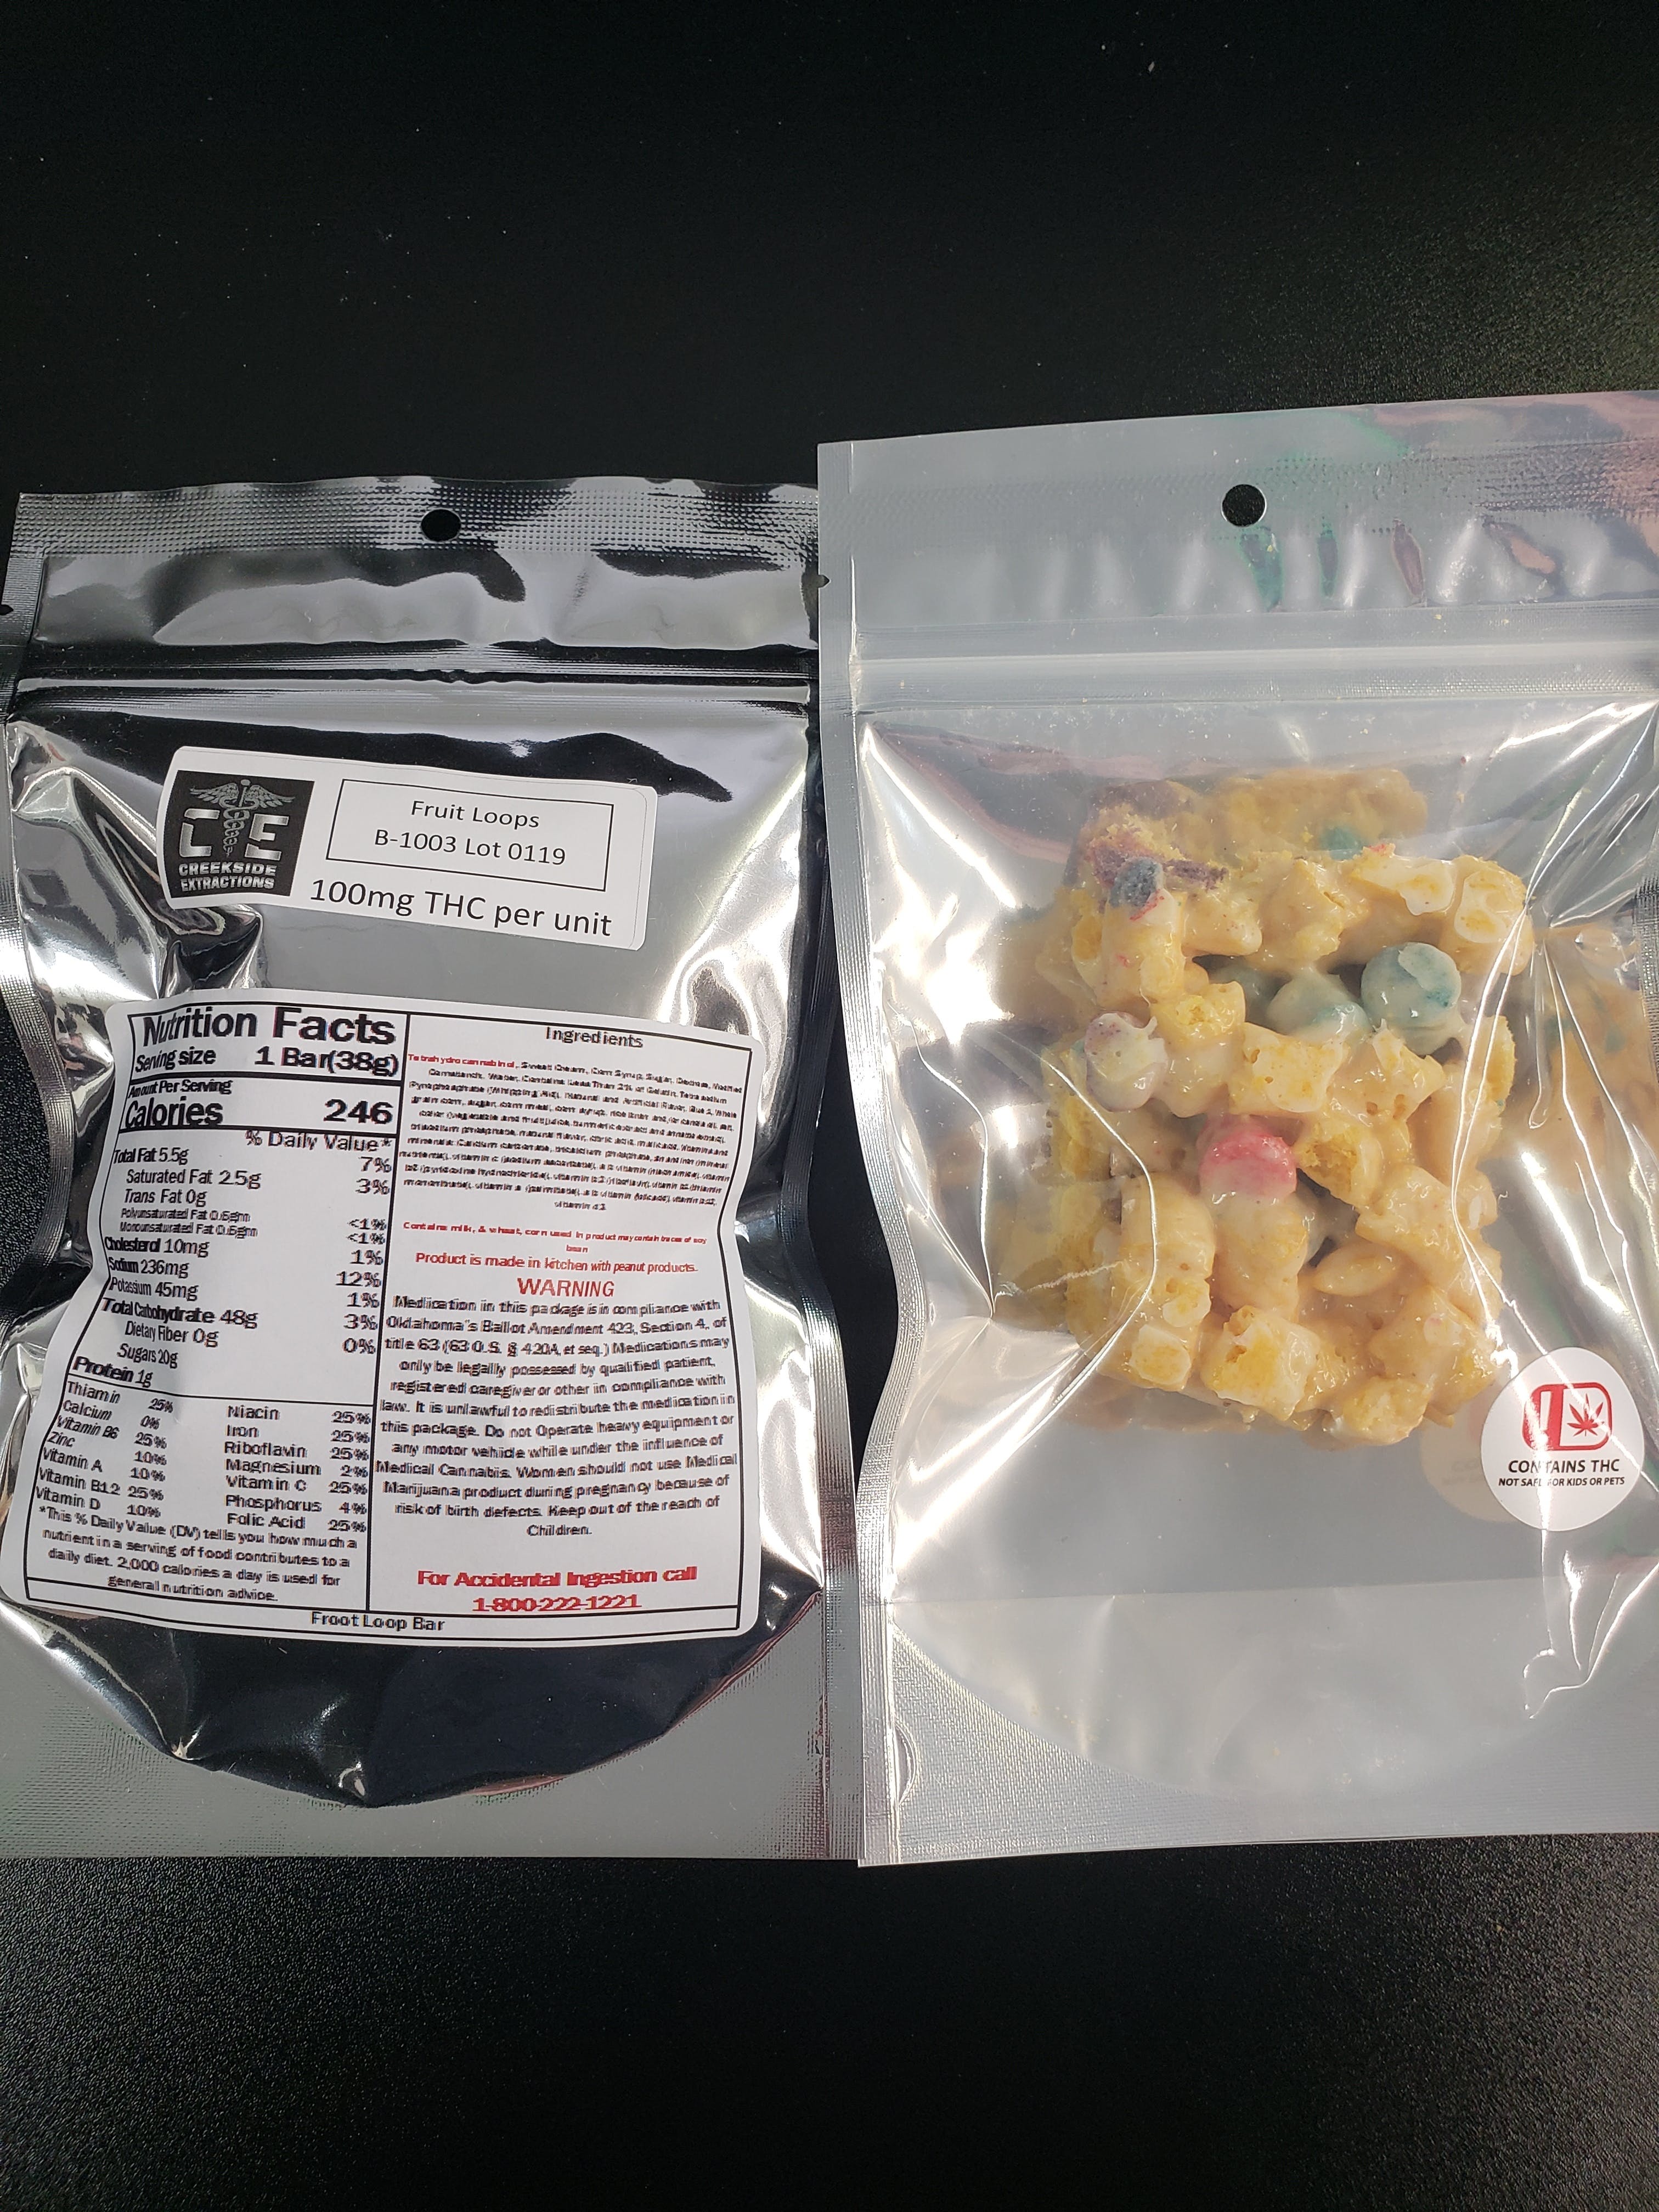 edible-creekside-extractions-assorted-cereal-treats-100mg